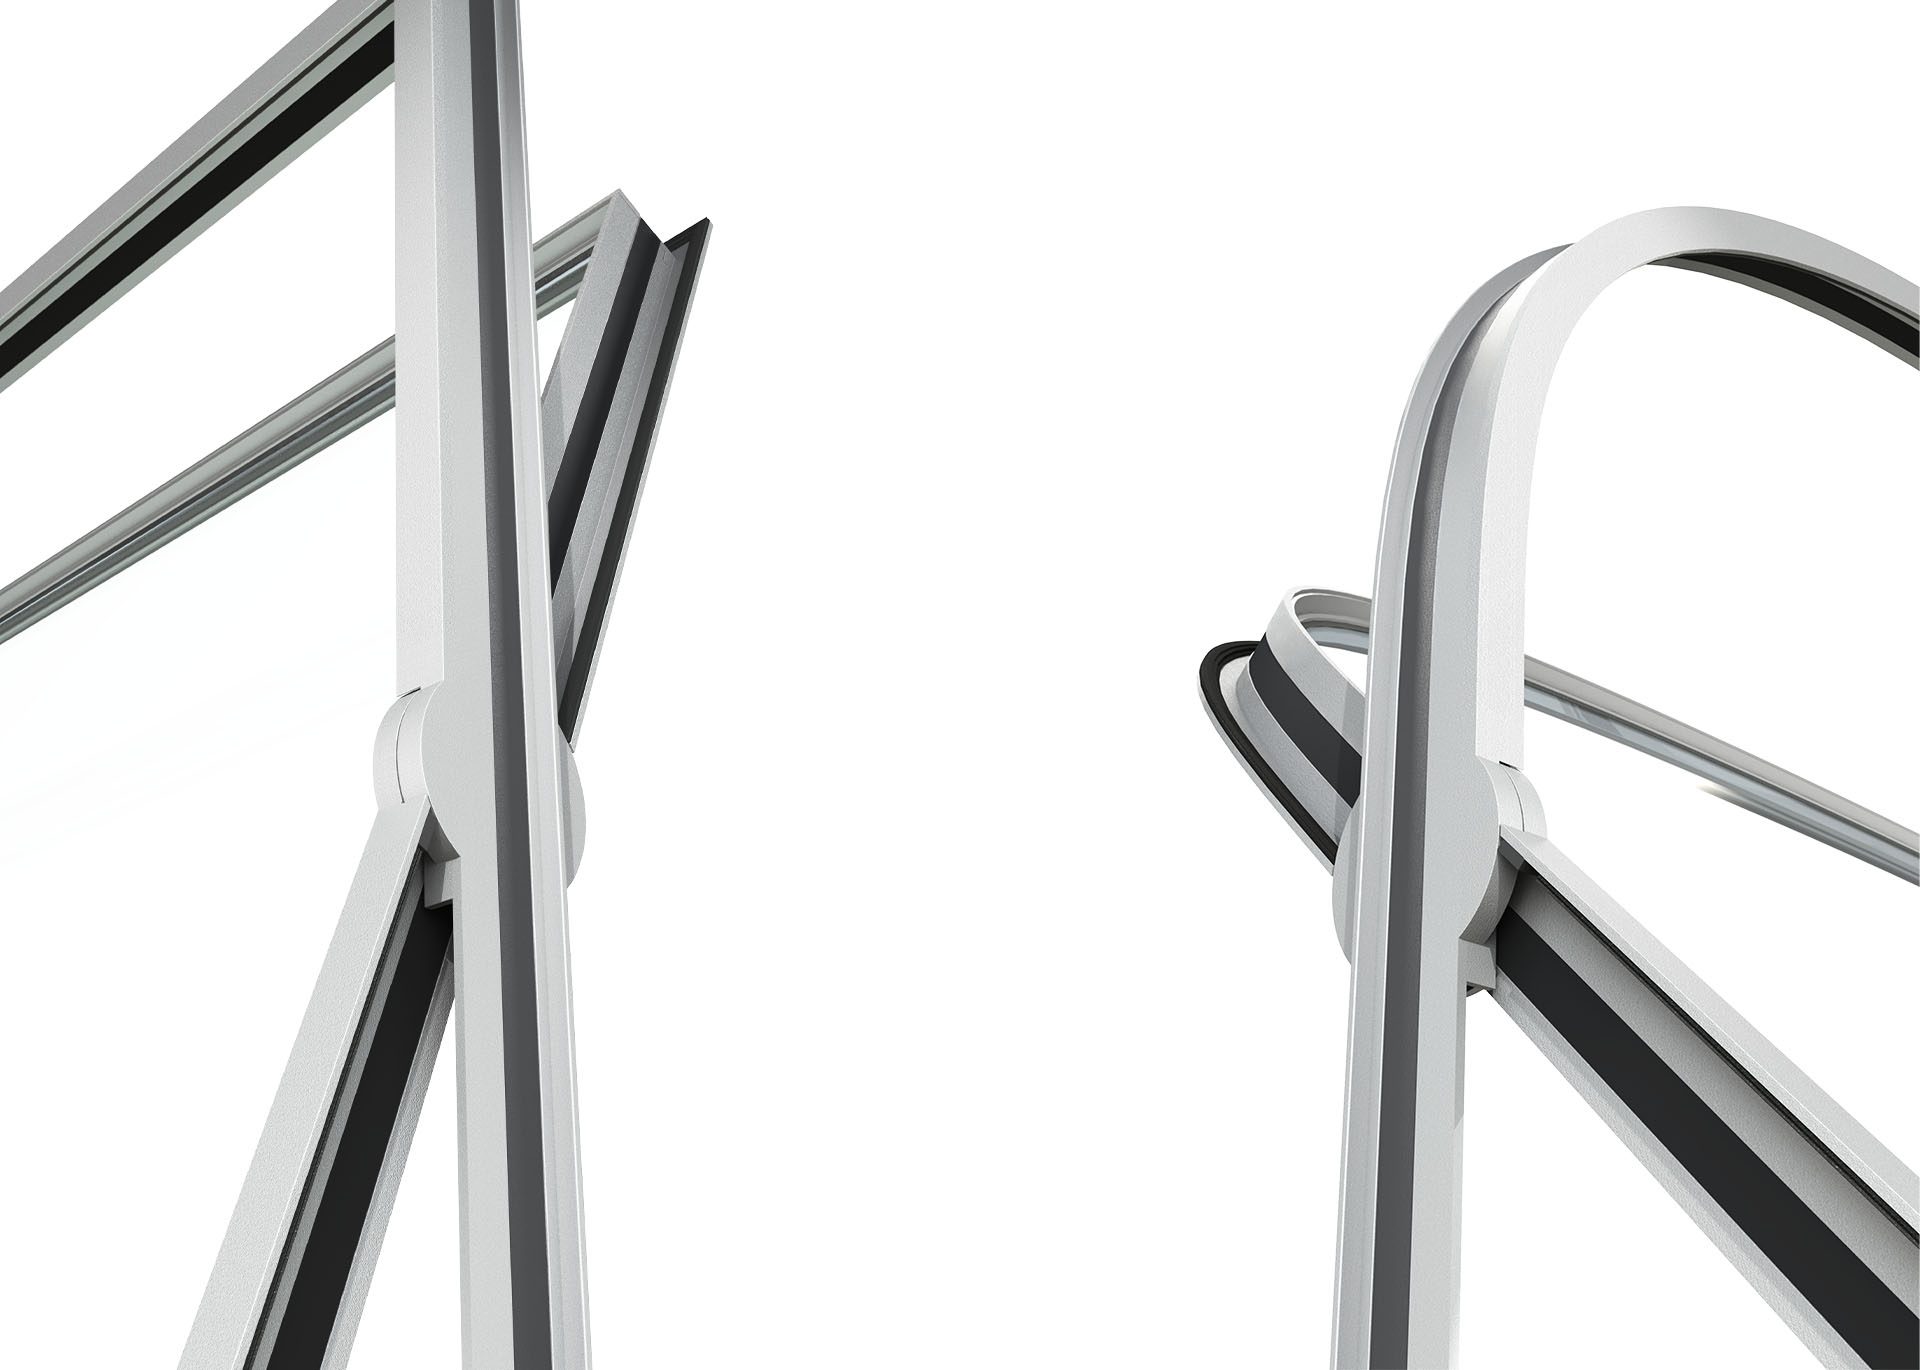 3d rendering detail of MHB steel pivot door curves and angles